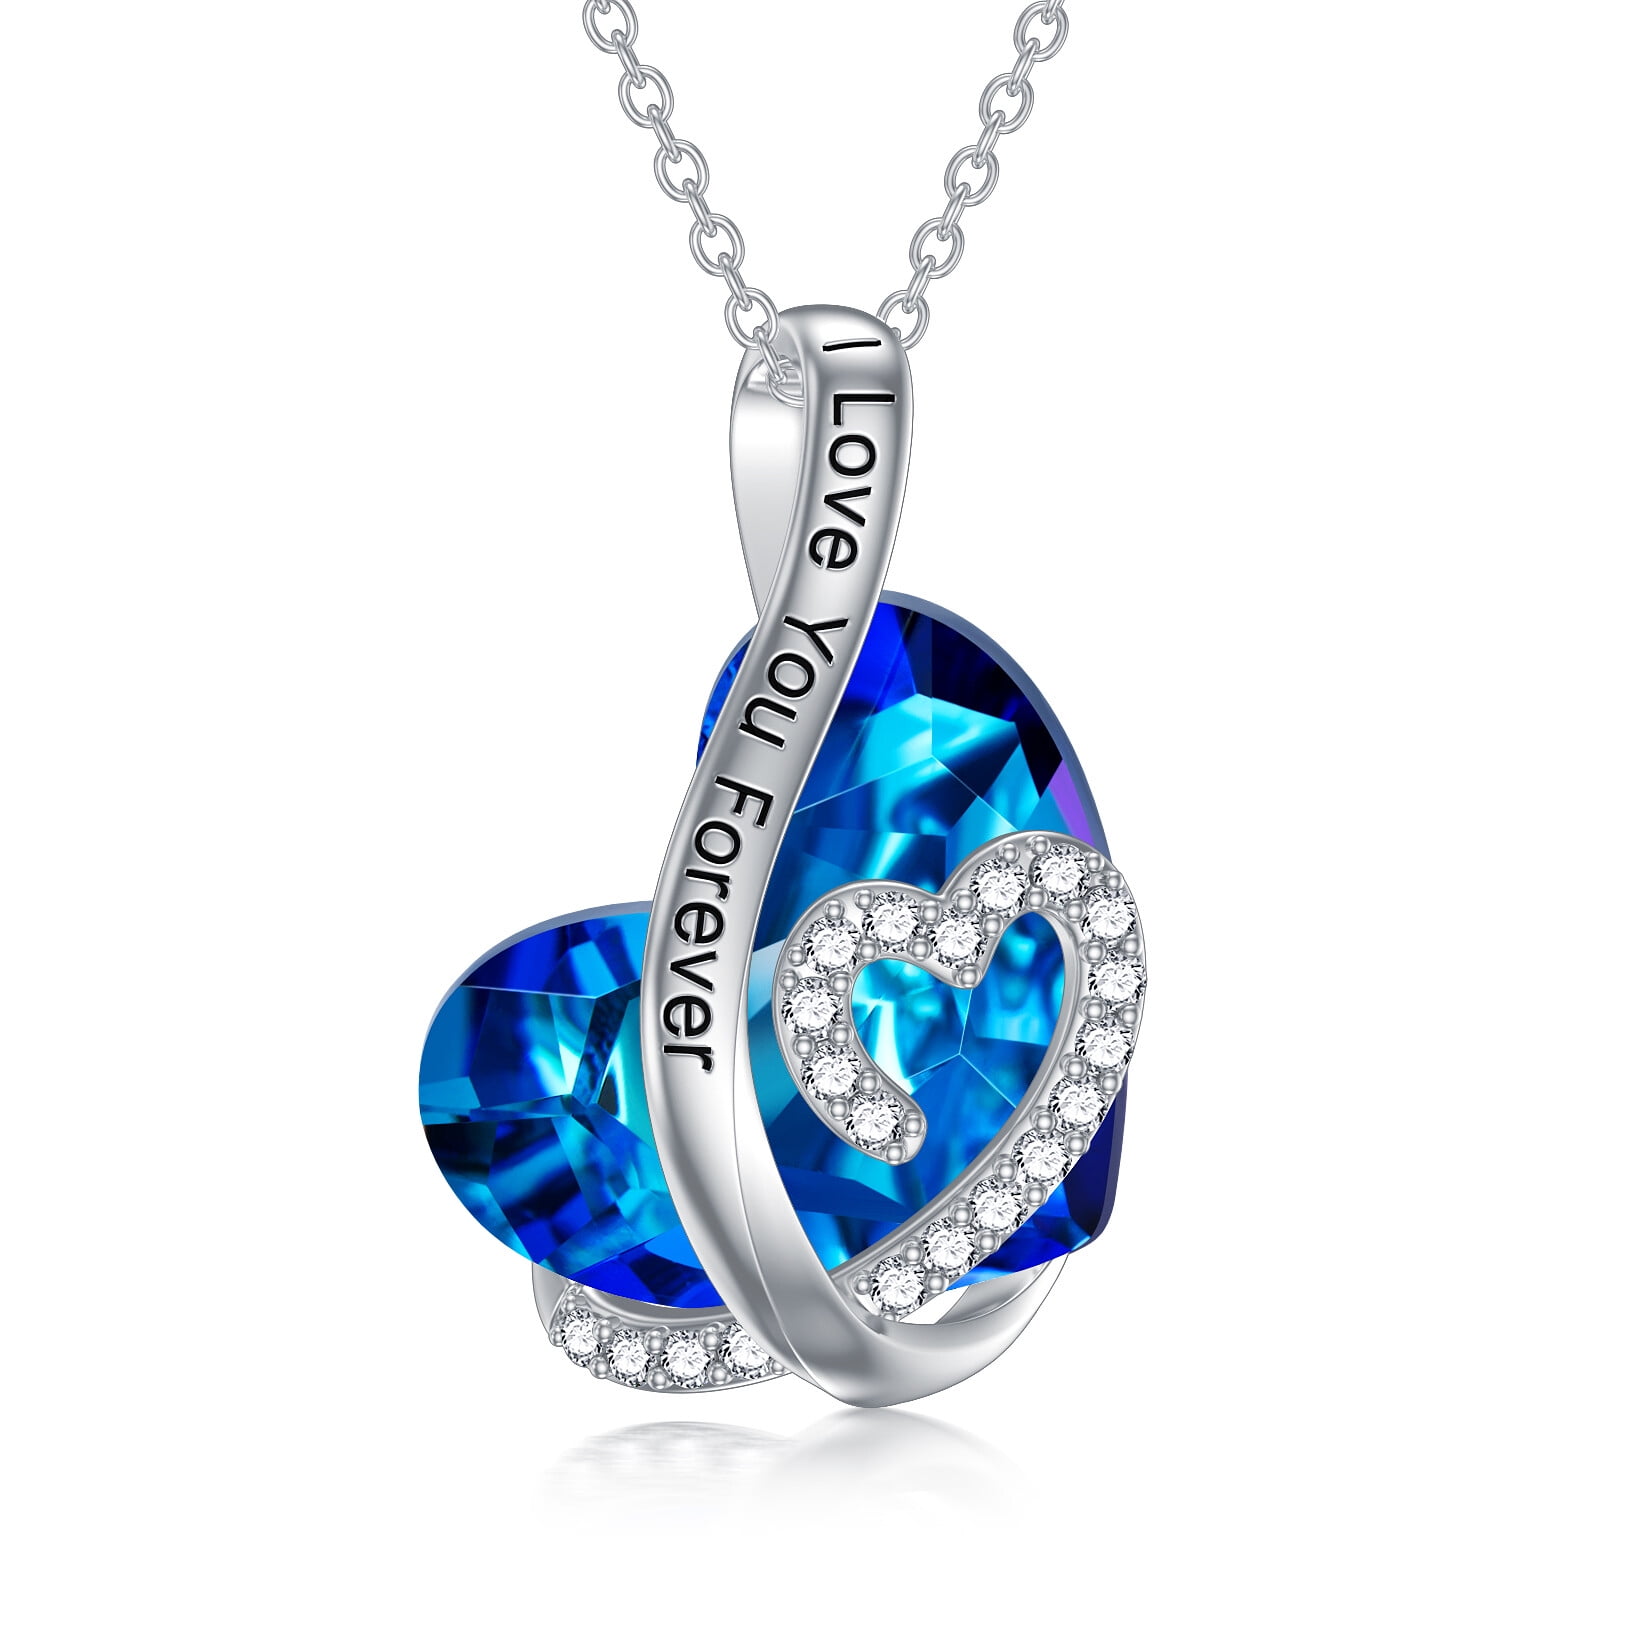 WINNICACA S925 Sterling Silver Initial Necklace Blue Cubic Zirconia 26 Initial Letters Personalized Pendant Necklace